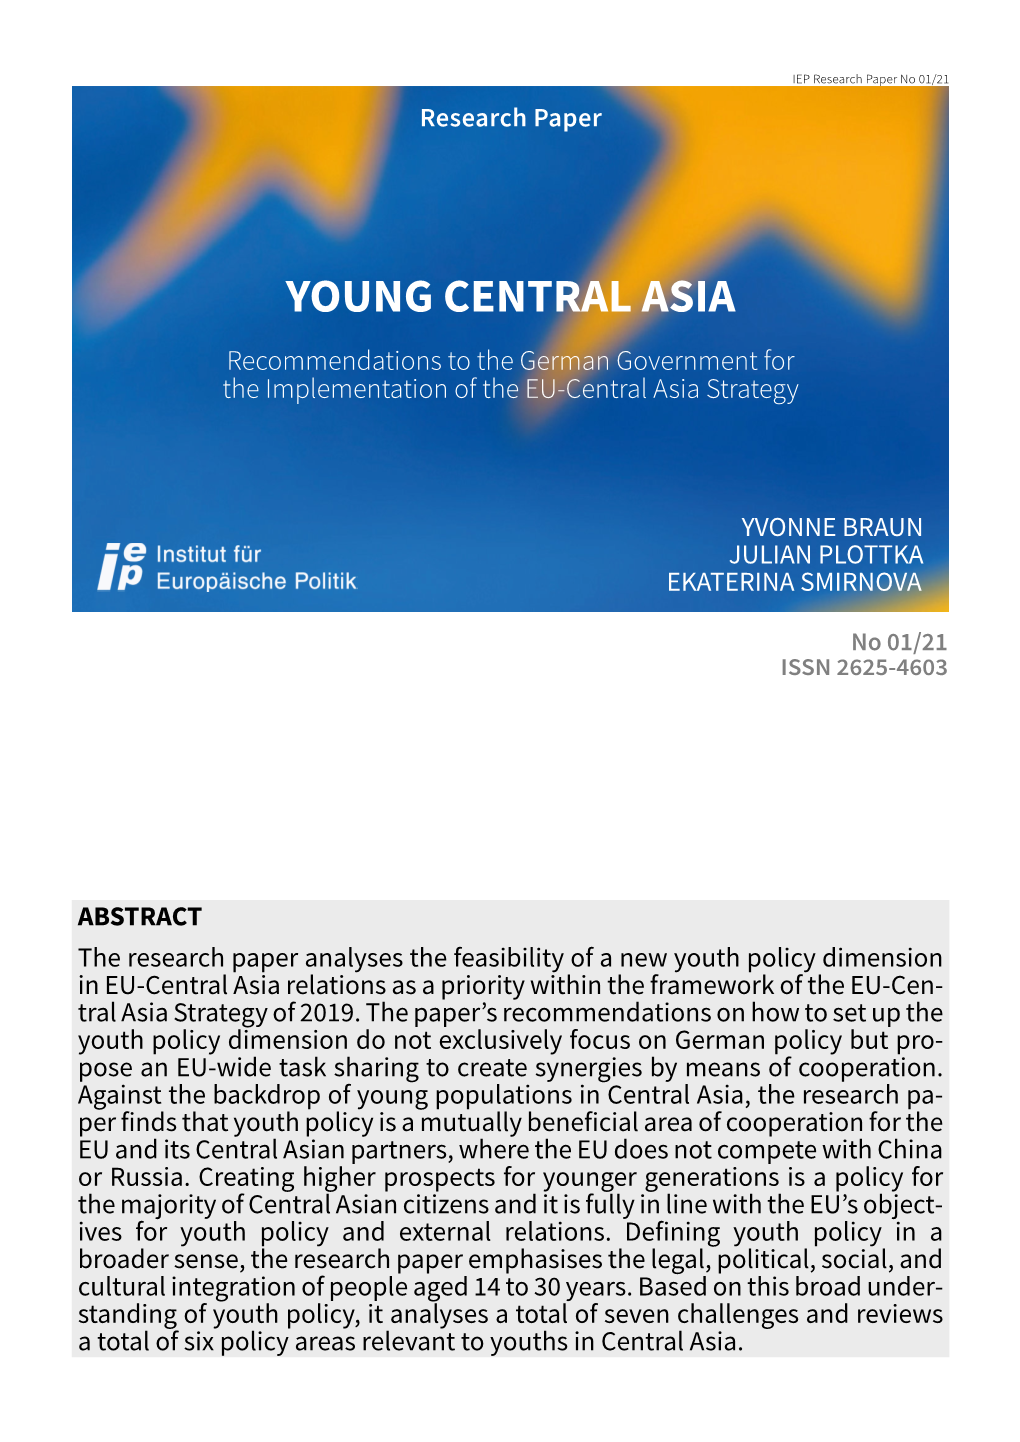 YOUNG CENTRAL ASIA Recommendations to the German Government for the Implementation of the EU-Central Asia Strategy